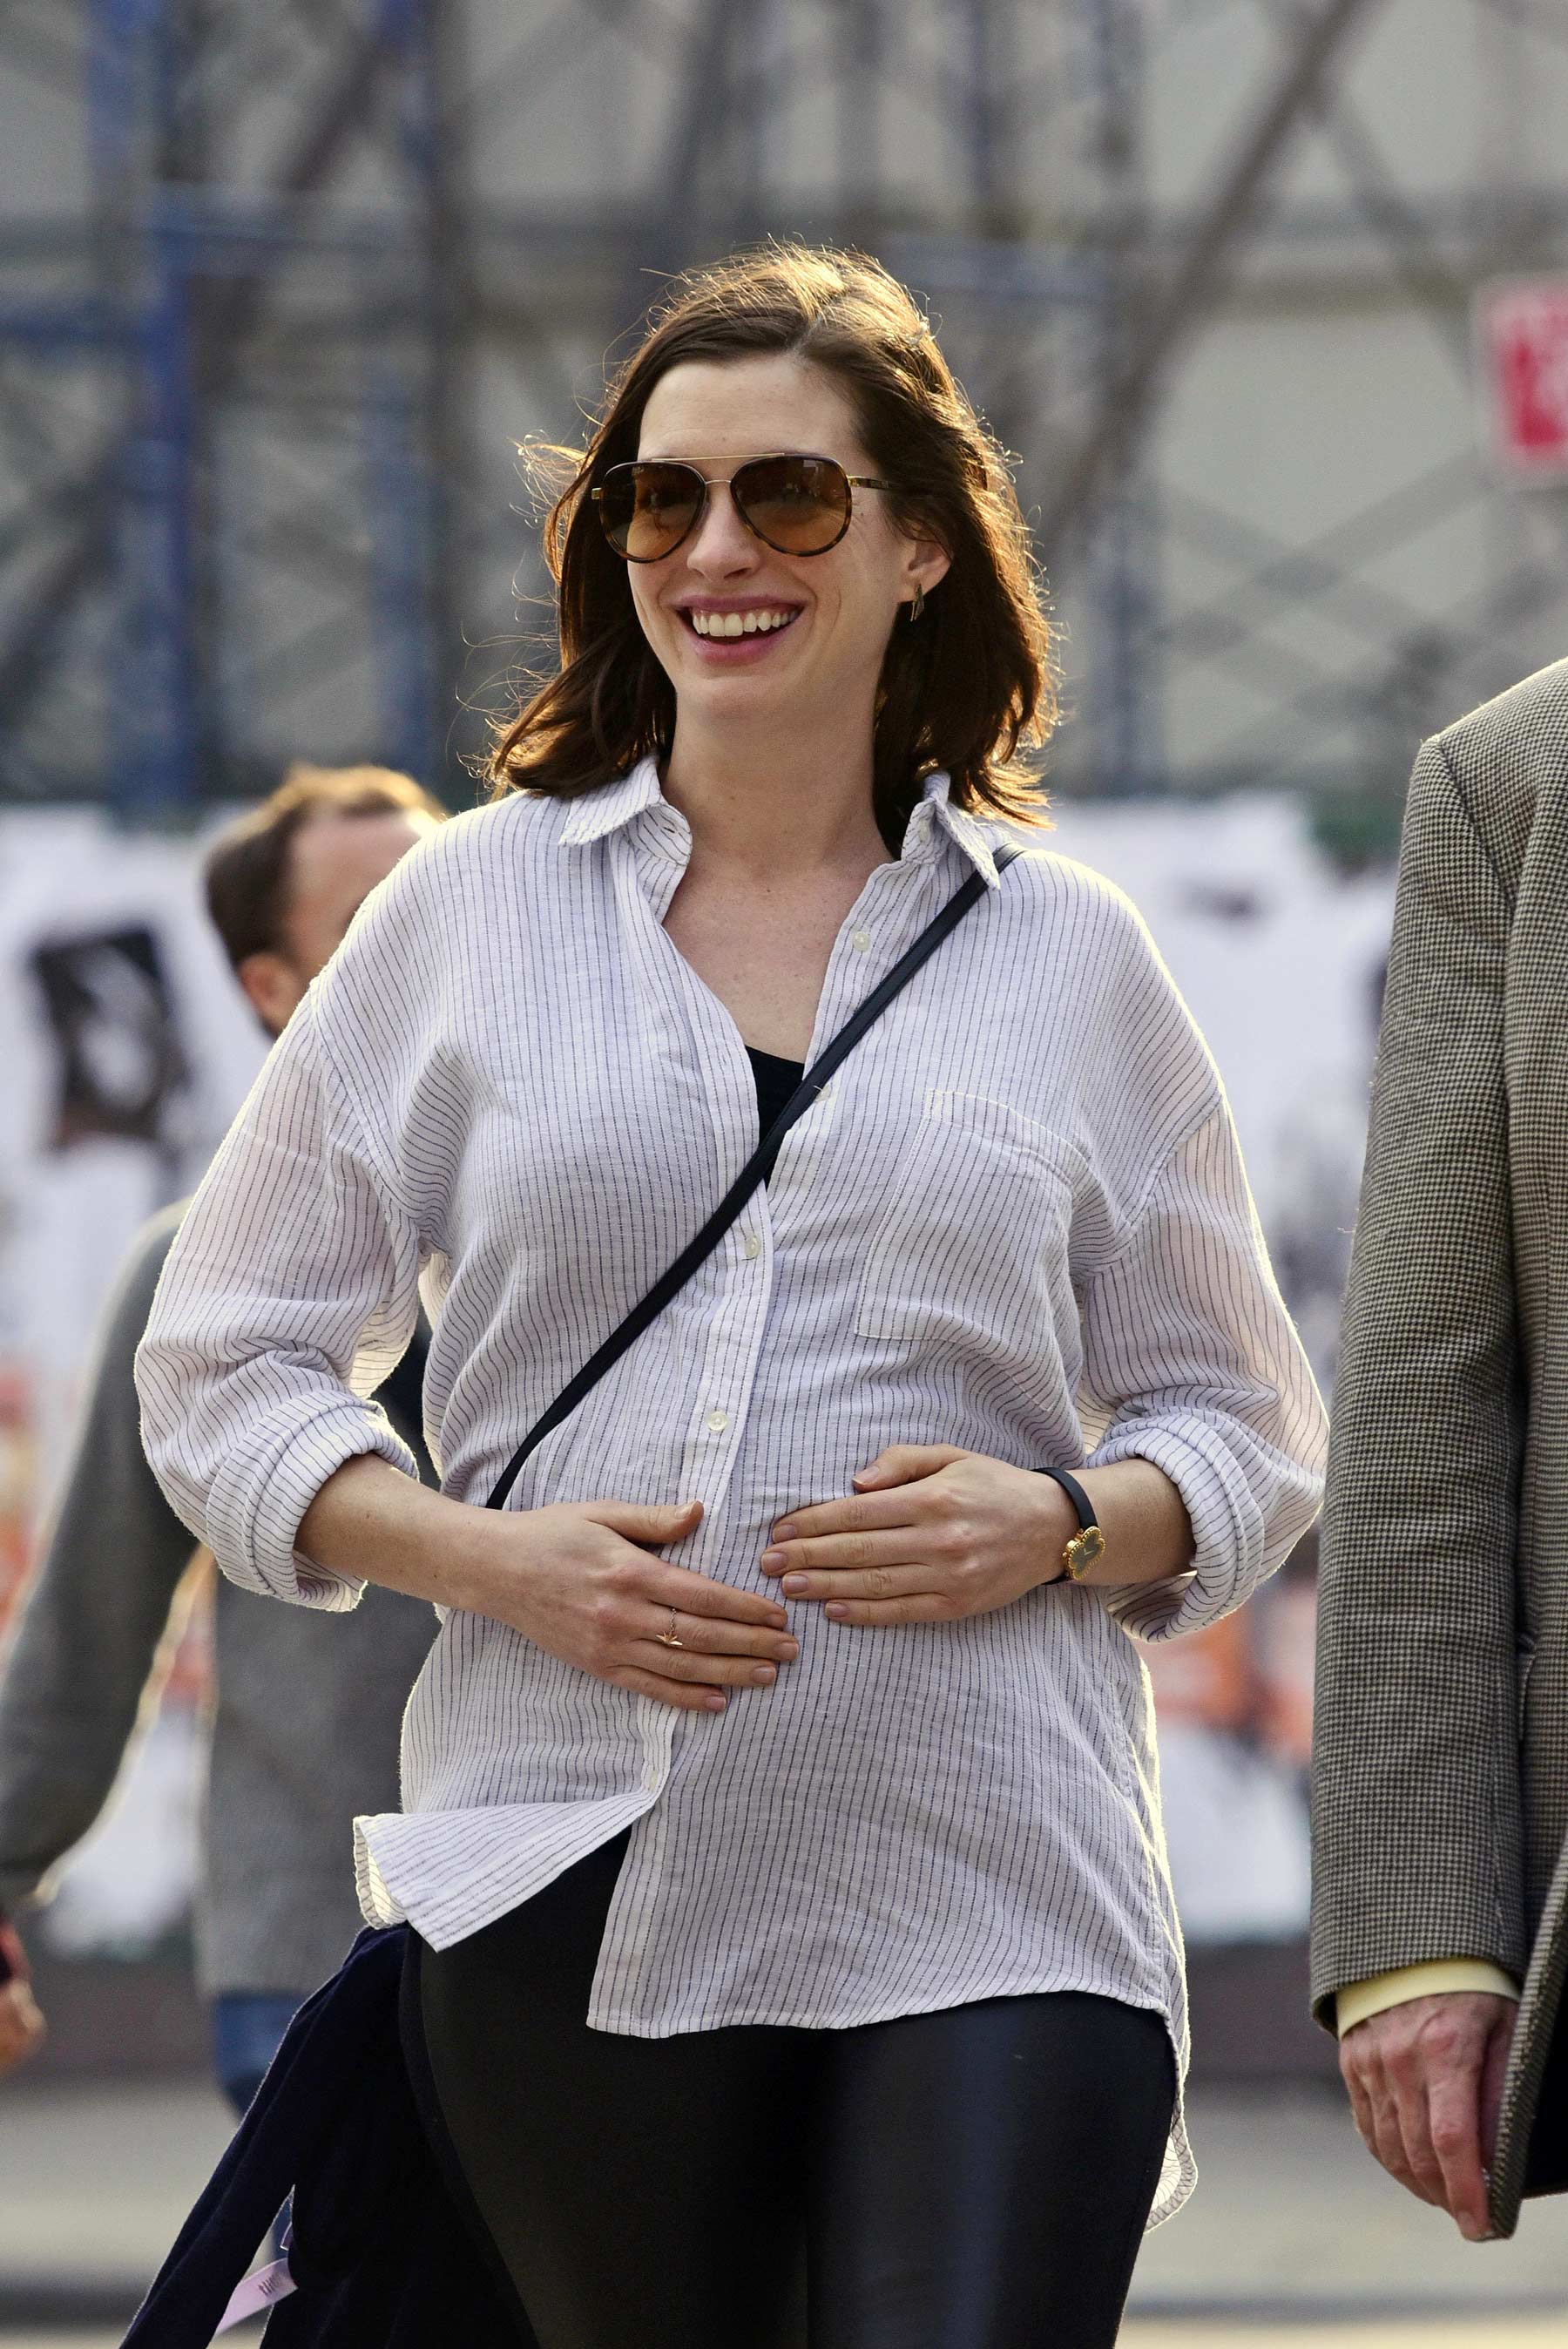 Anne Hathaway out in downtown New York